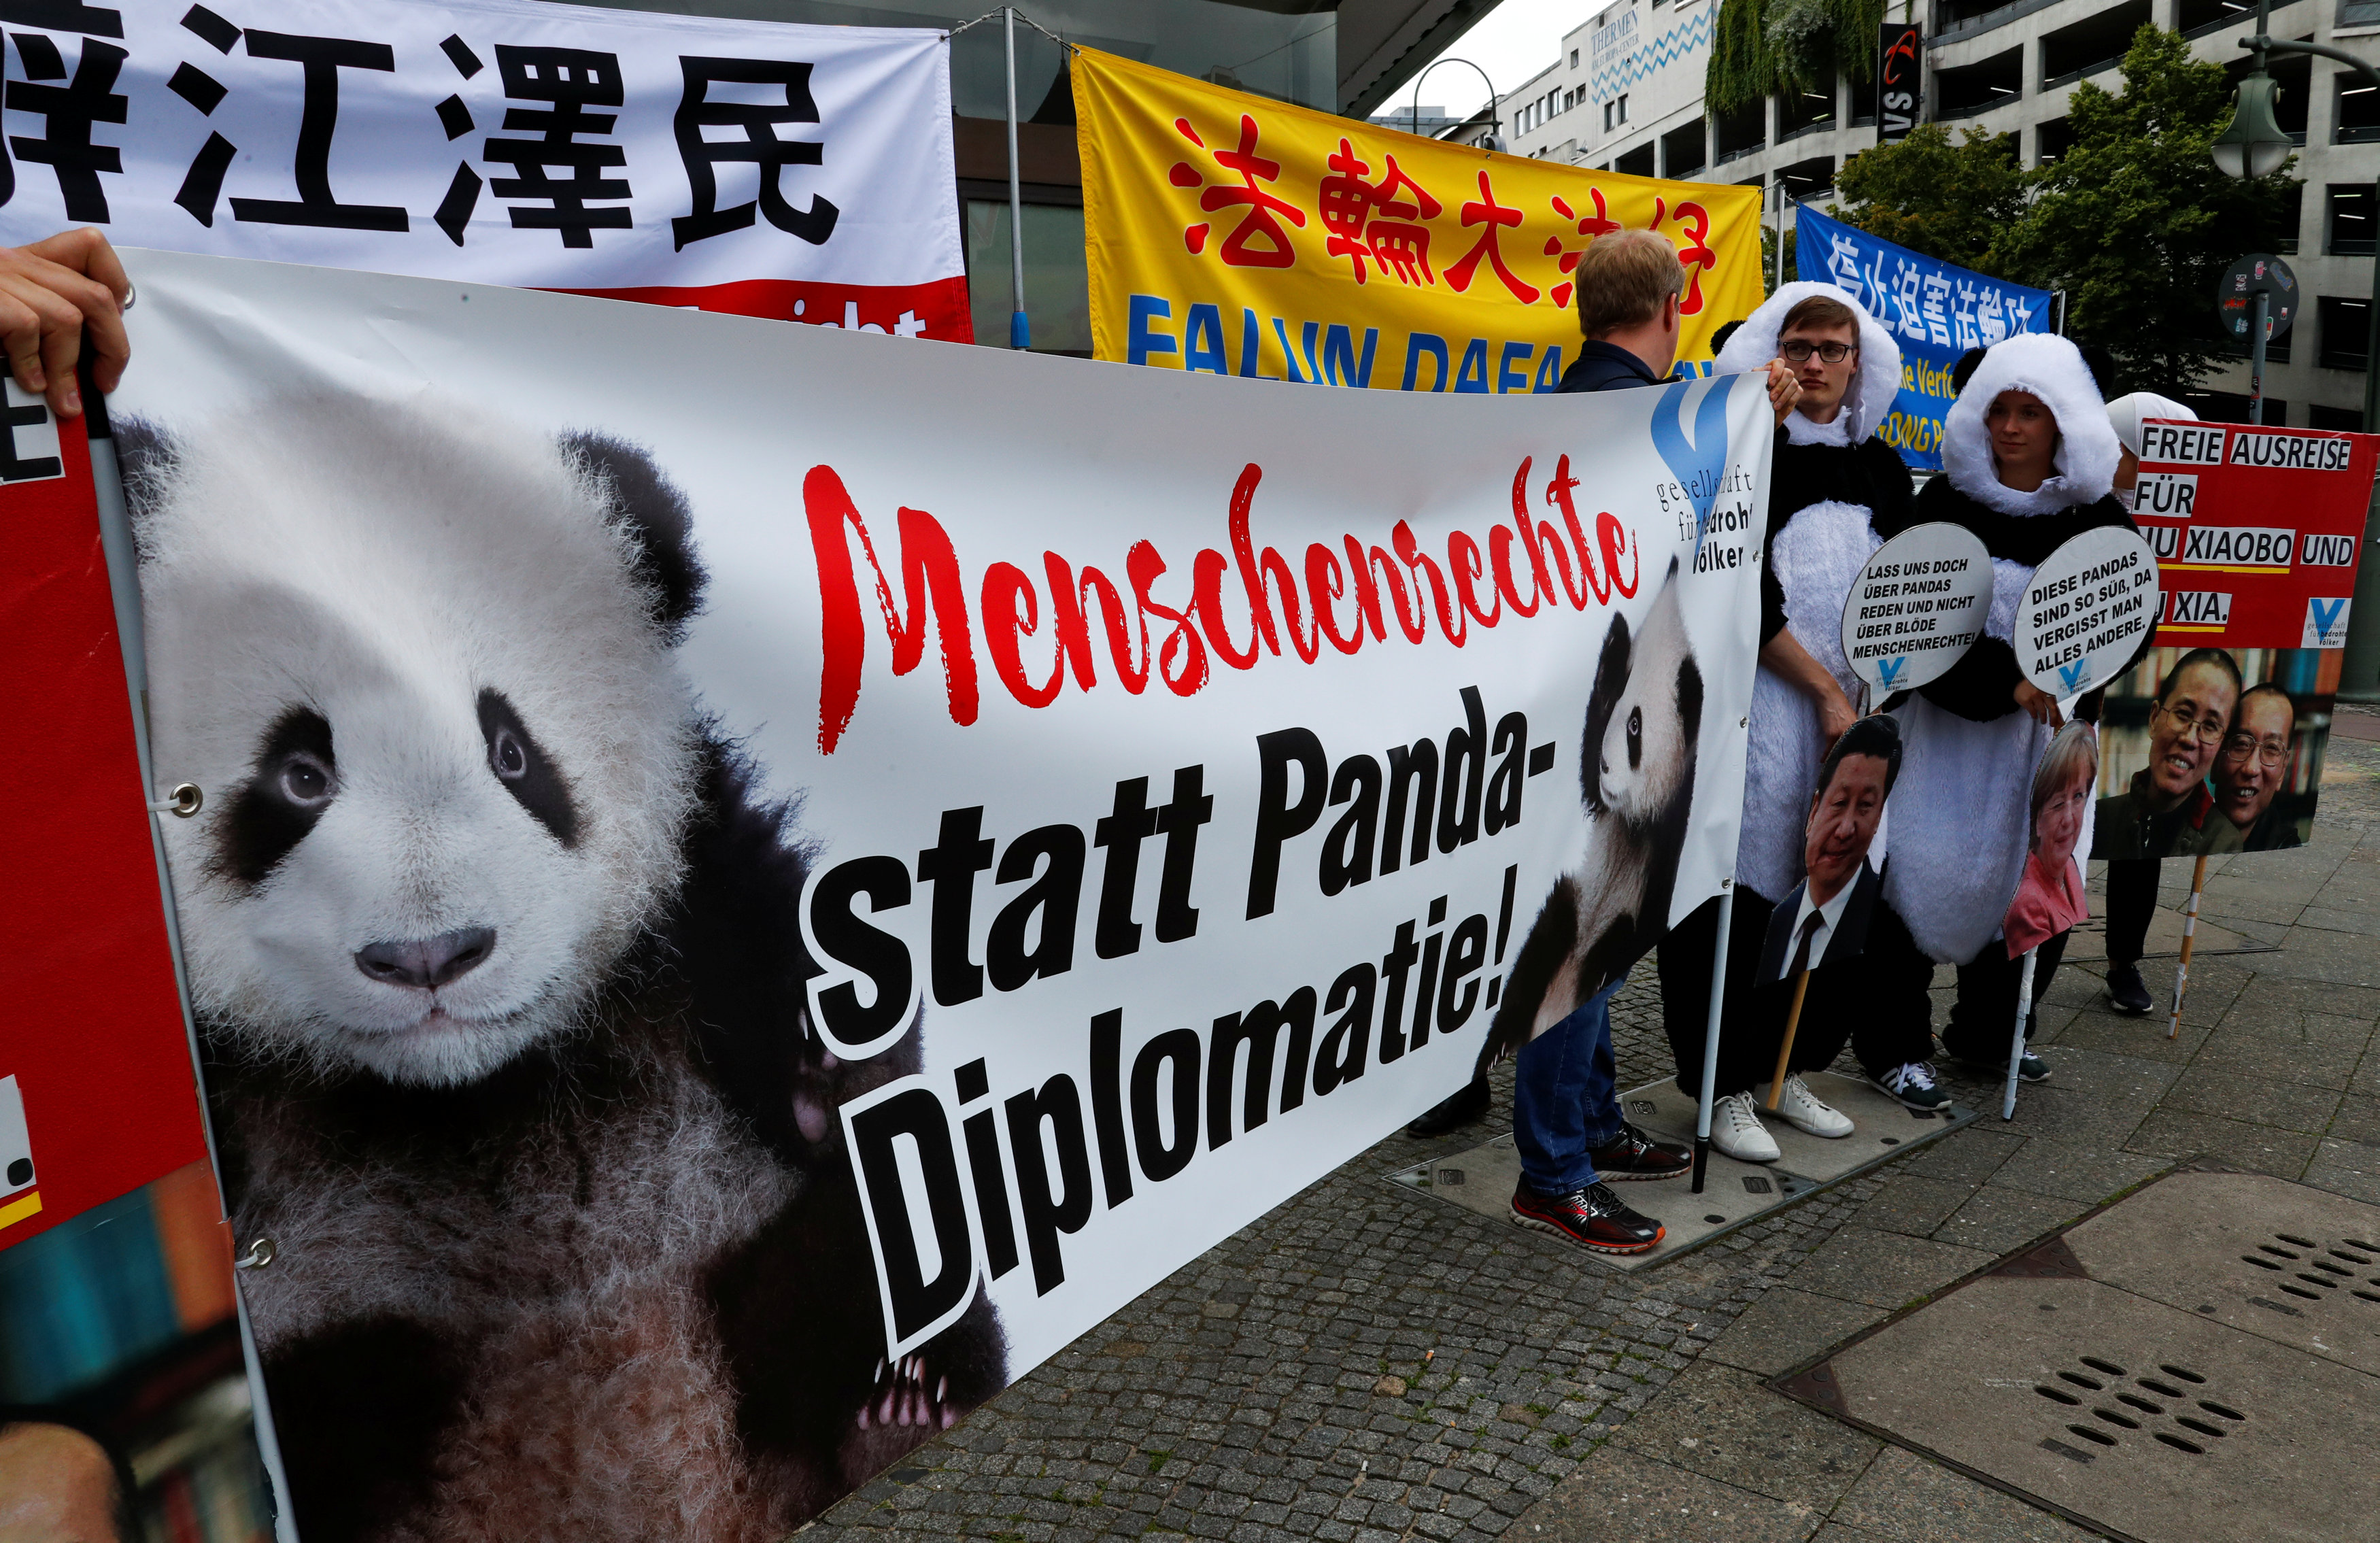 People protest before the arrival of German Chancellor Angela Merkel and Chinese President Xi Jinping at a welcome ceremony for Chinese panda bears Meng Meng and Jiao Qing, outside the Zoo in Berlin, Germany July 5, 2017. Banner reads, "Human rights instead of panda diplomacy". REUTERS/Fabrizio Bensch